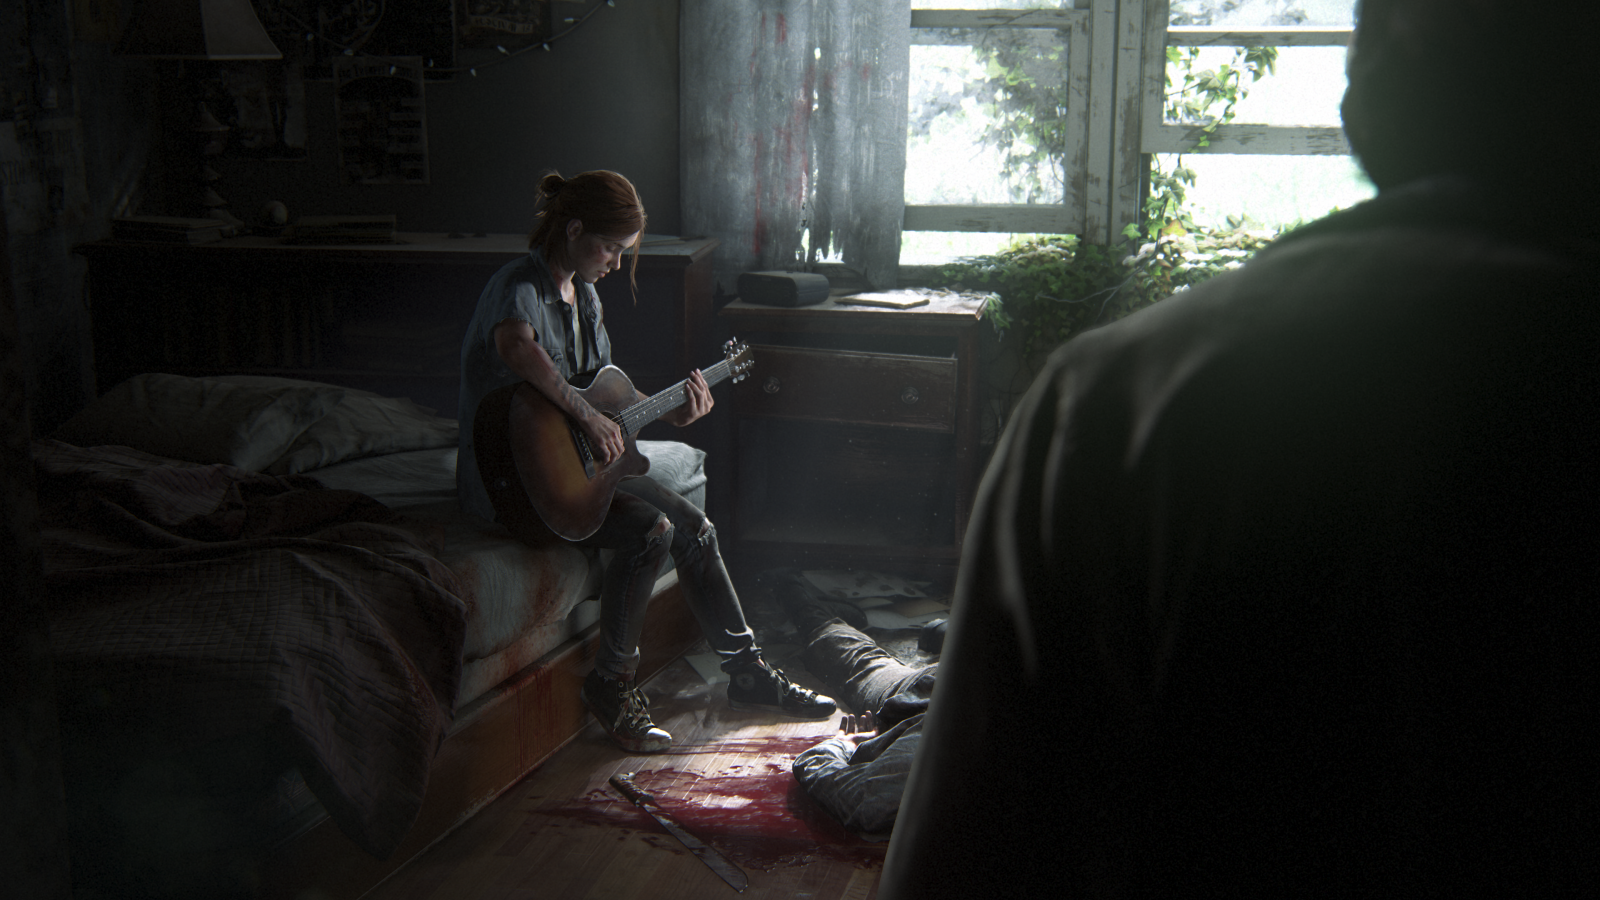 the last of us part 2 official soundtrack